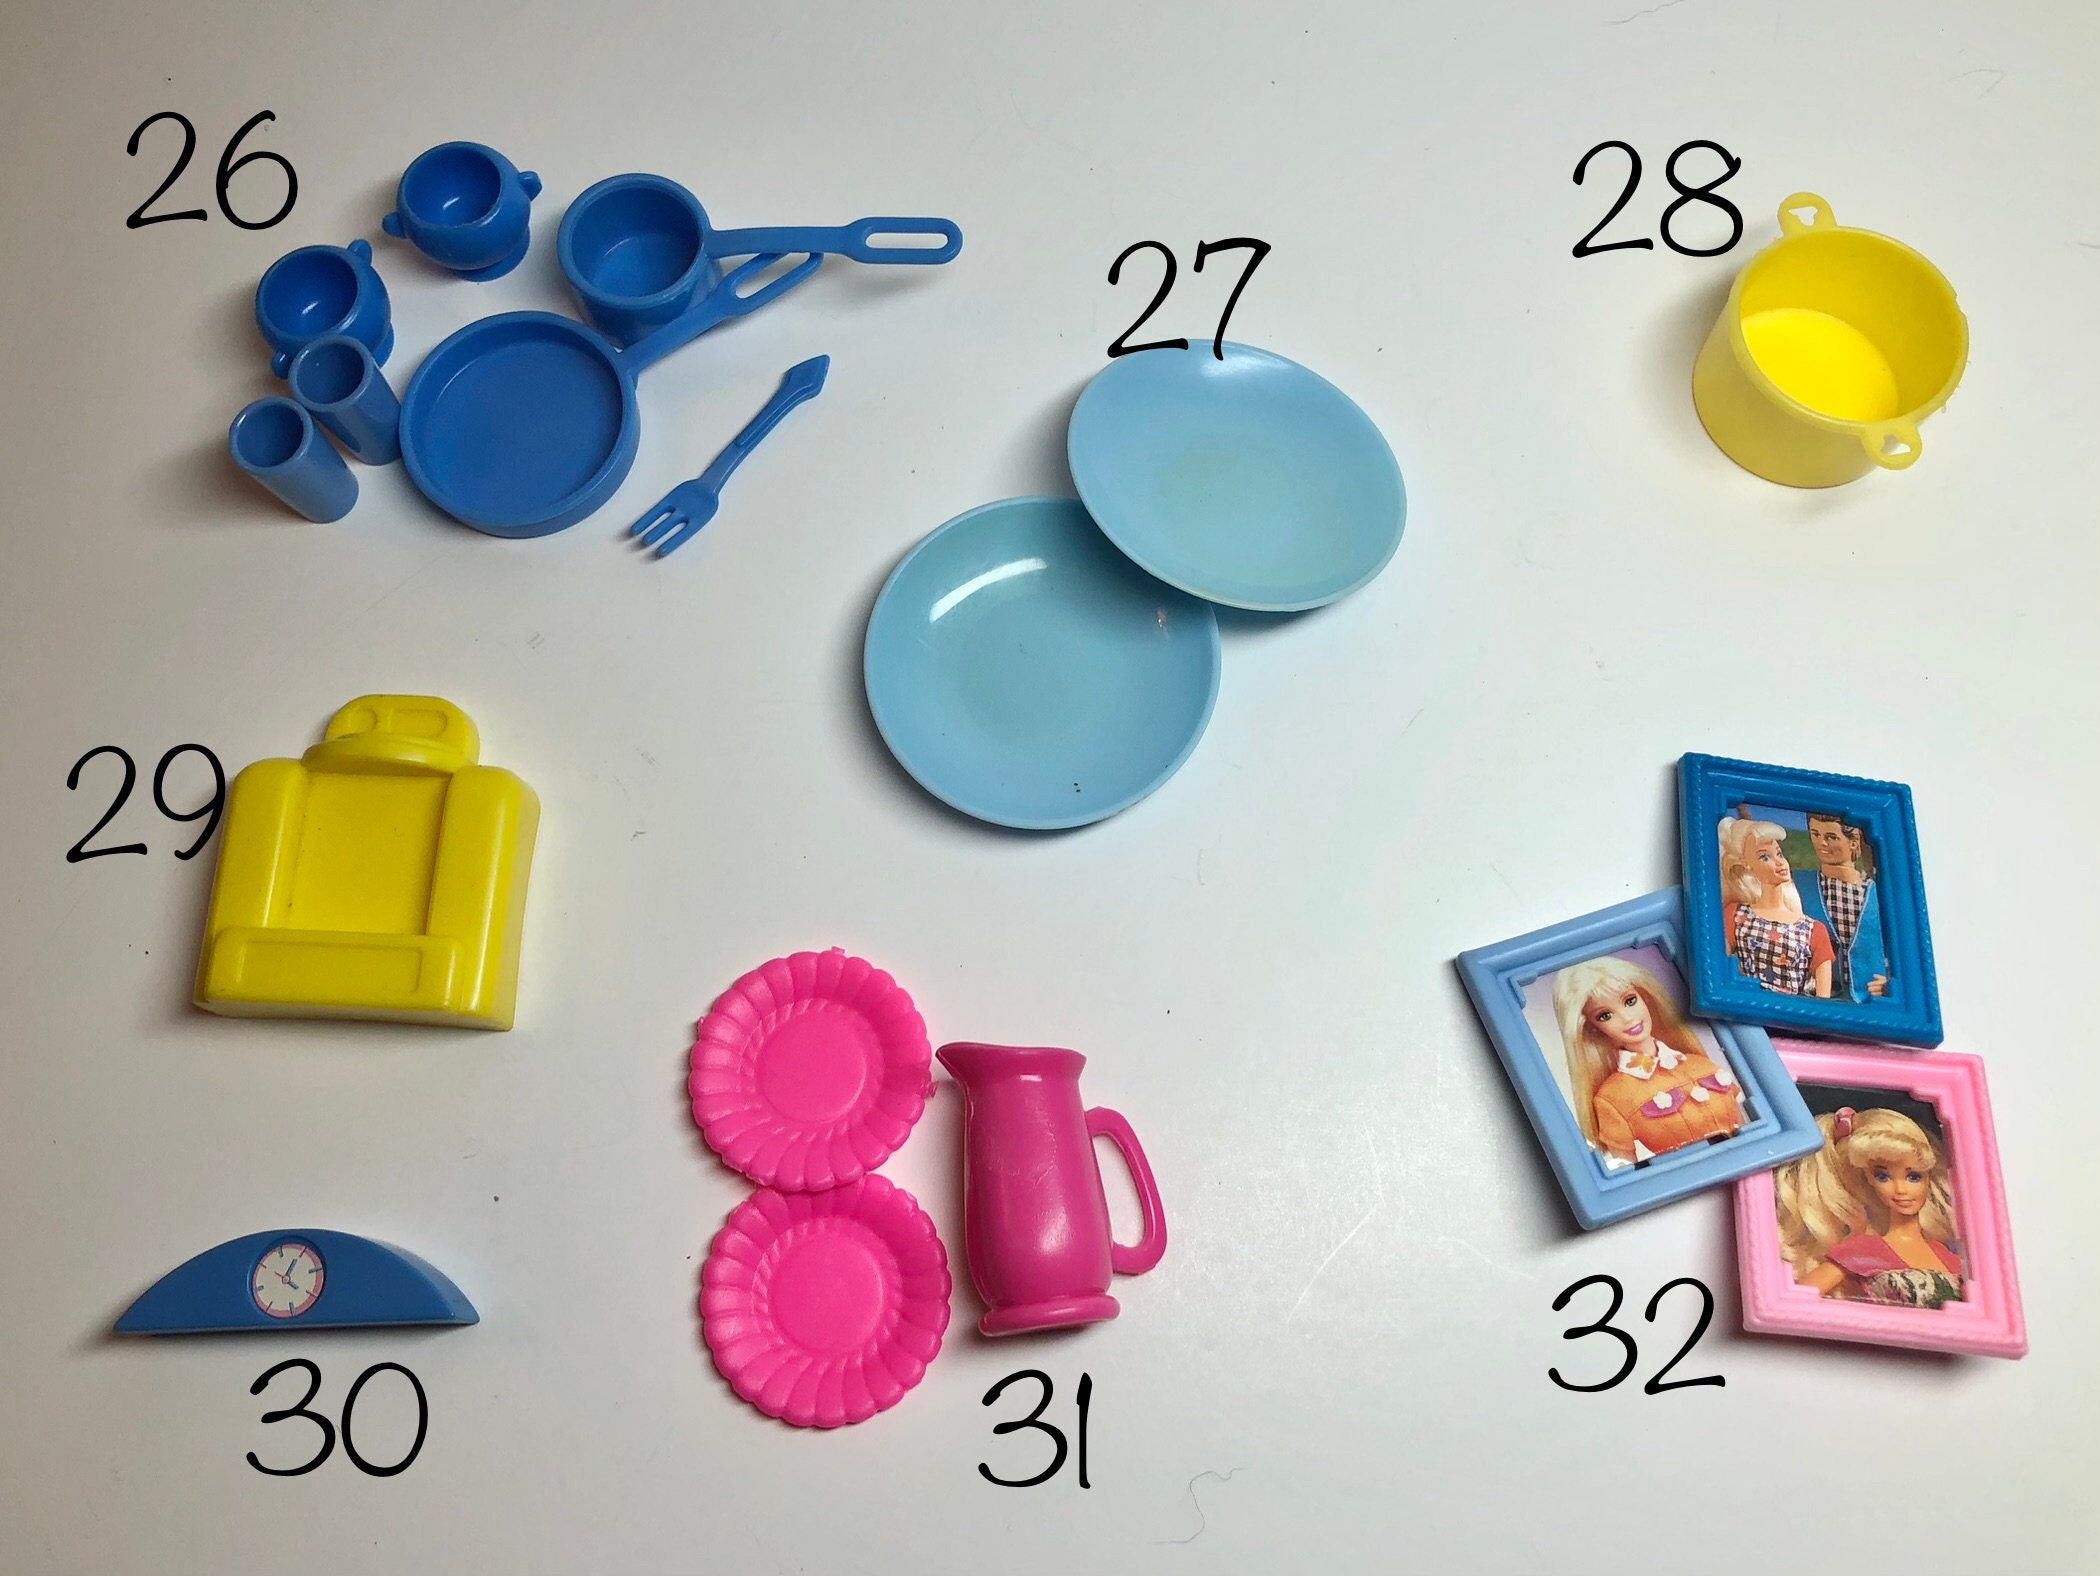 Vintage Barbie Accessories 3 PICK YOUR OWN Bags, Dishes, Food, Furniture,  Housewares, Radio, Playset Parts 80s 90s Mattel 